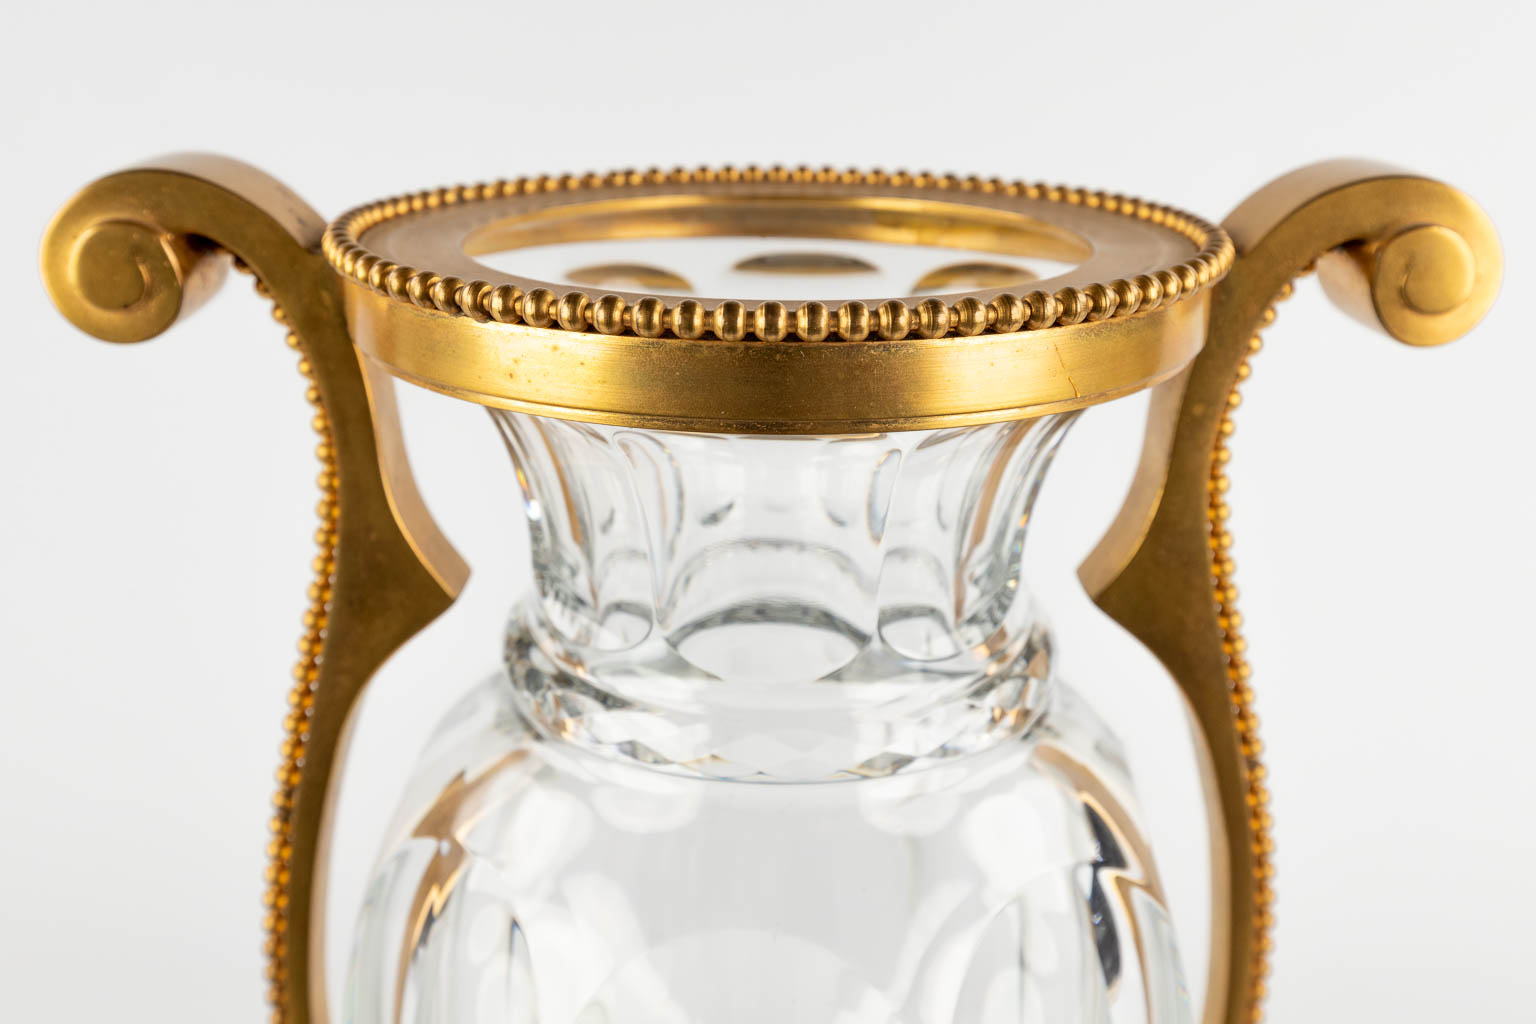 Baccarat, a large crystal vase mounted with gilt bronze. 20th C. (D:14 x W:22 x H:38,5 cm)